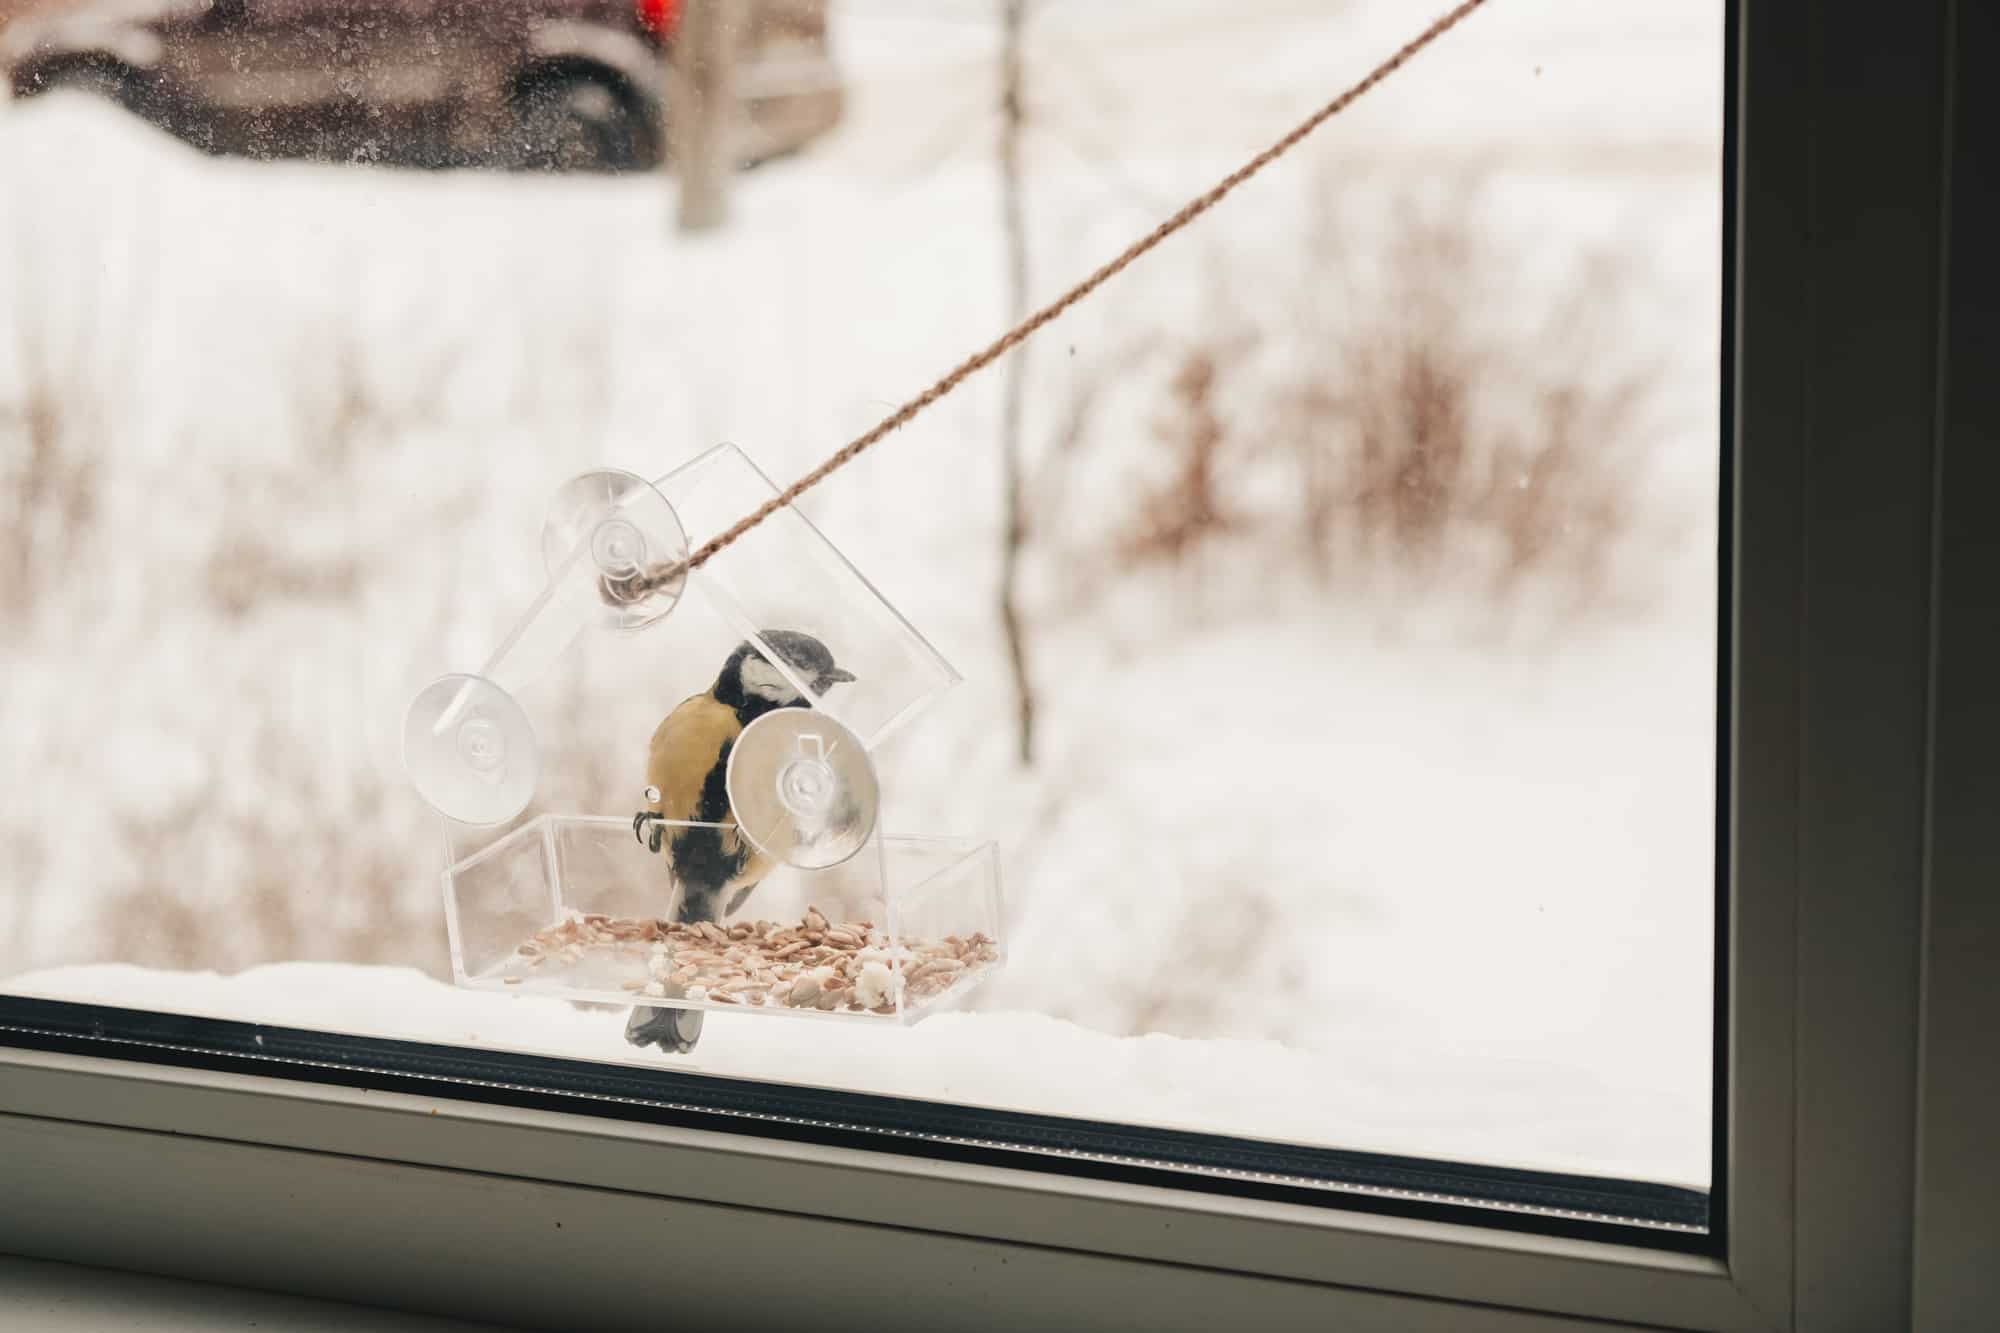 titmouse has seeds in a transparent feeder